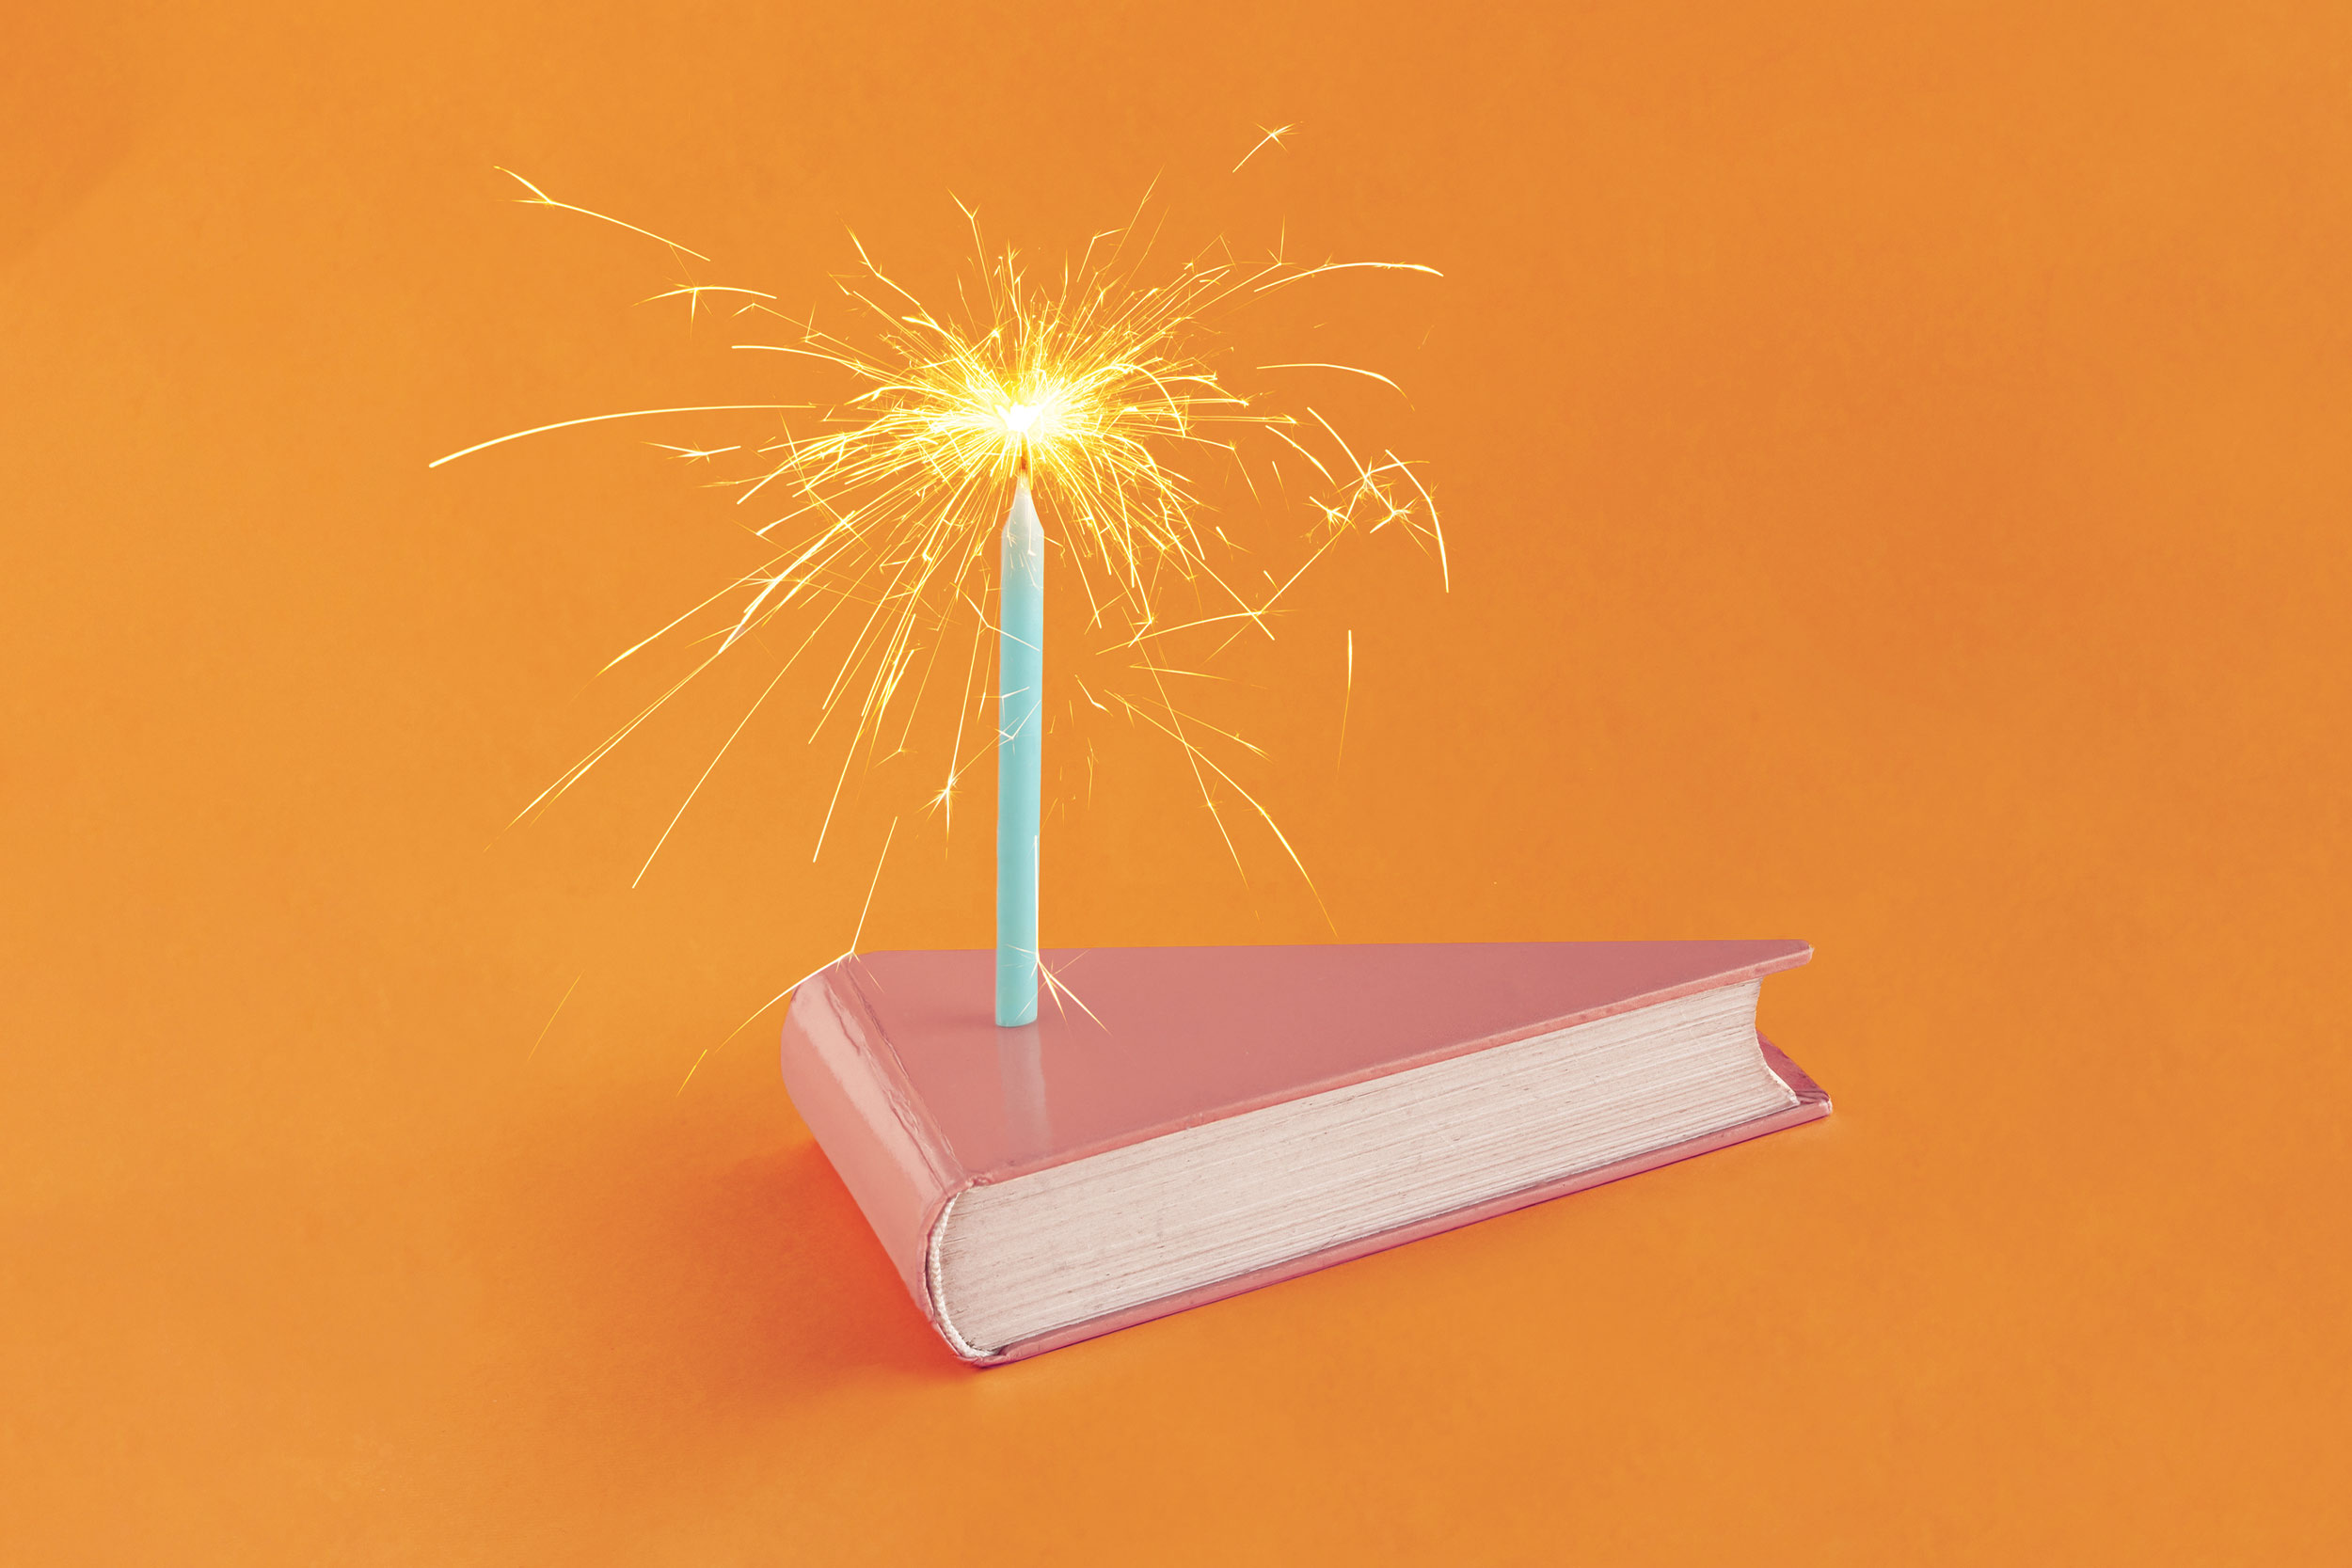 Birthday cake made of a book with a lit candle on it